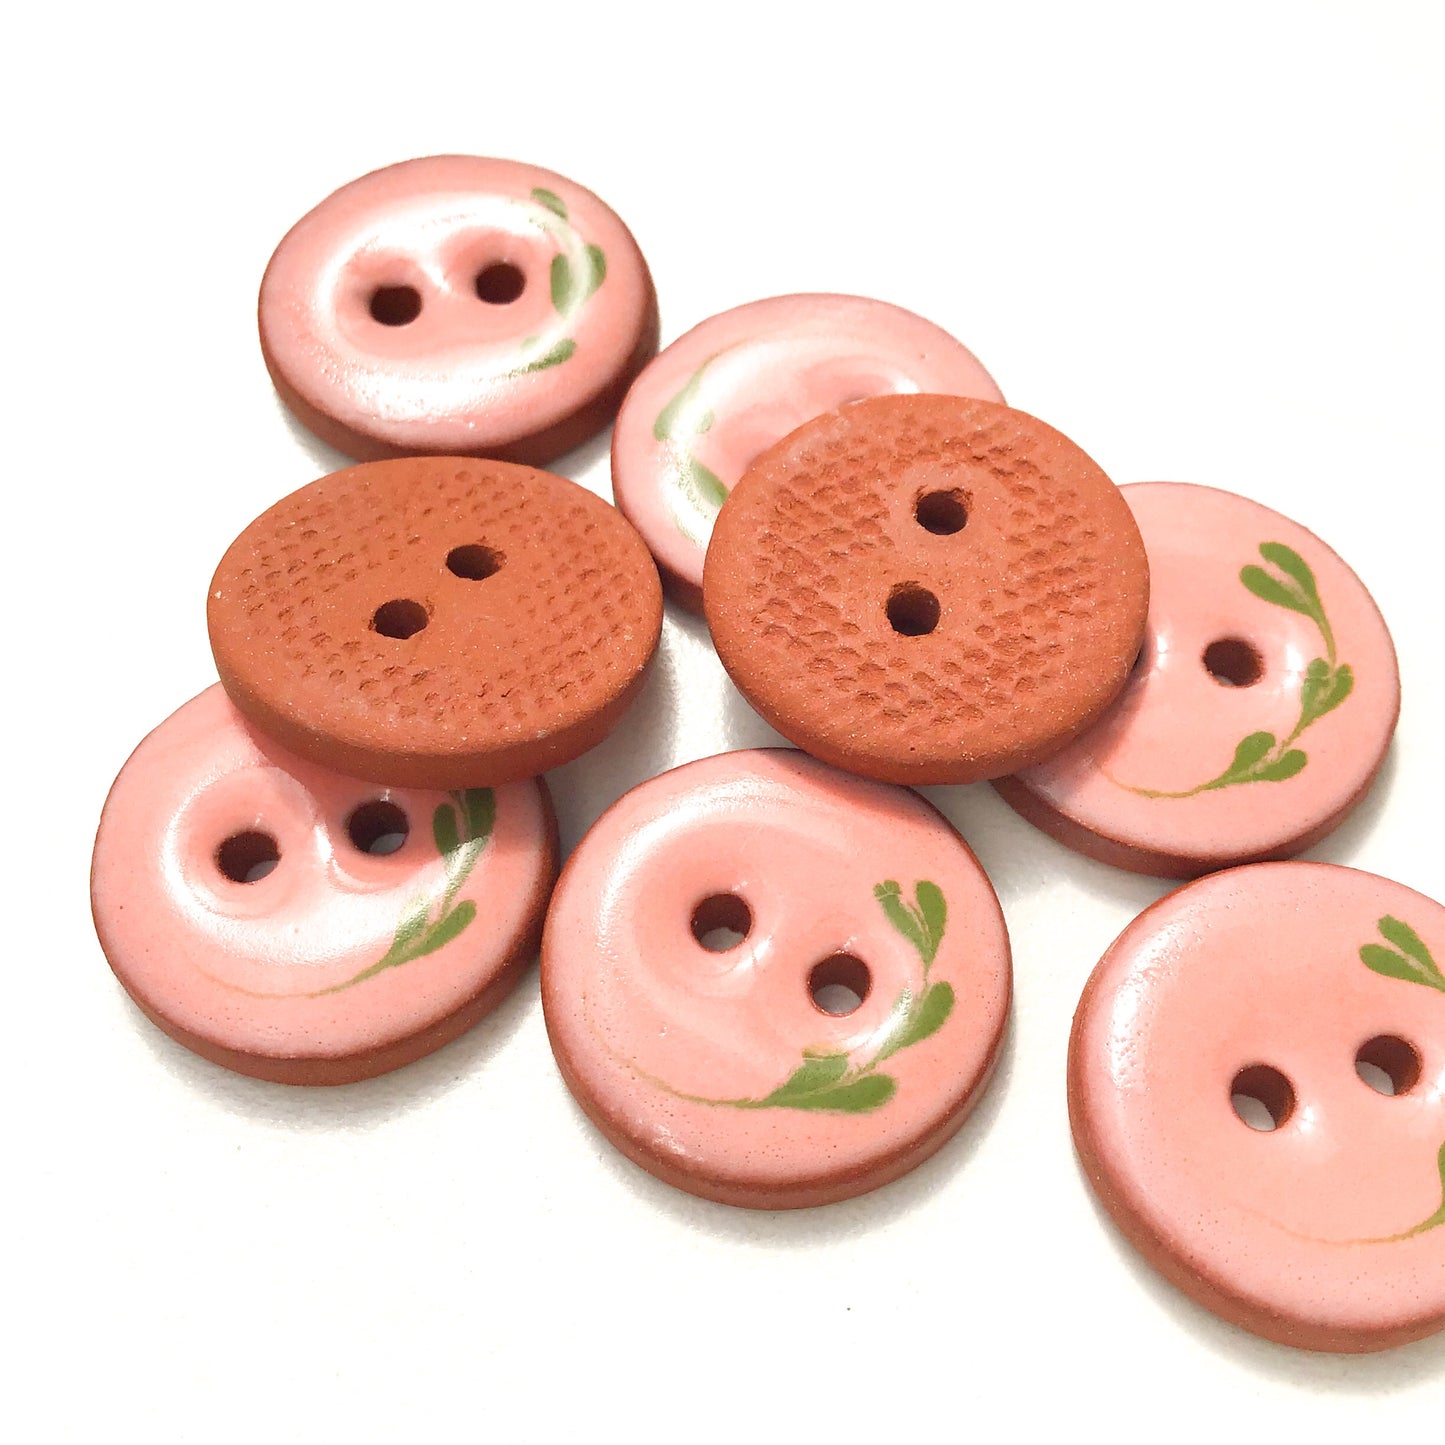 Salmon Pink Ceramic Leaflet Buttons - Round Ceramic Buttons - 3/4" - 8 Pack